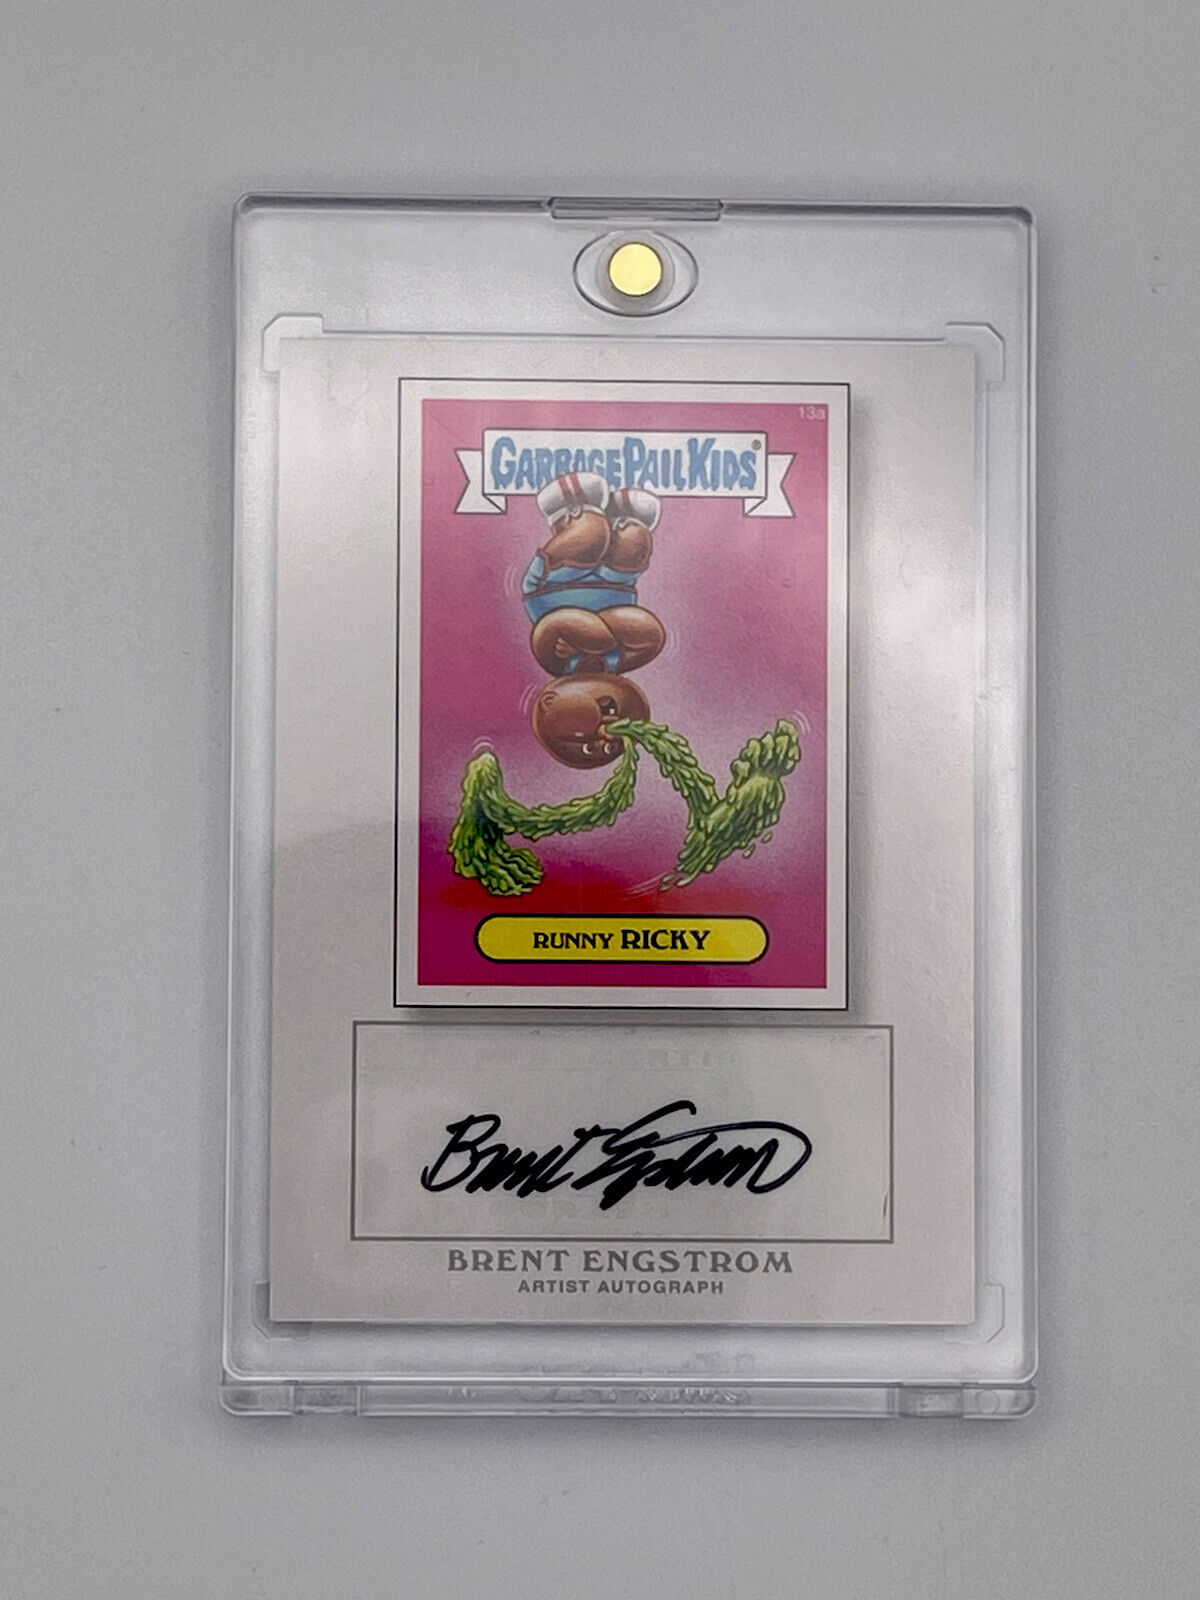 2014 Garbage Pail Kids Runny Ricky #13 Artist Brent Engstorm Auto - Beautiful ✨